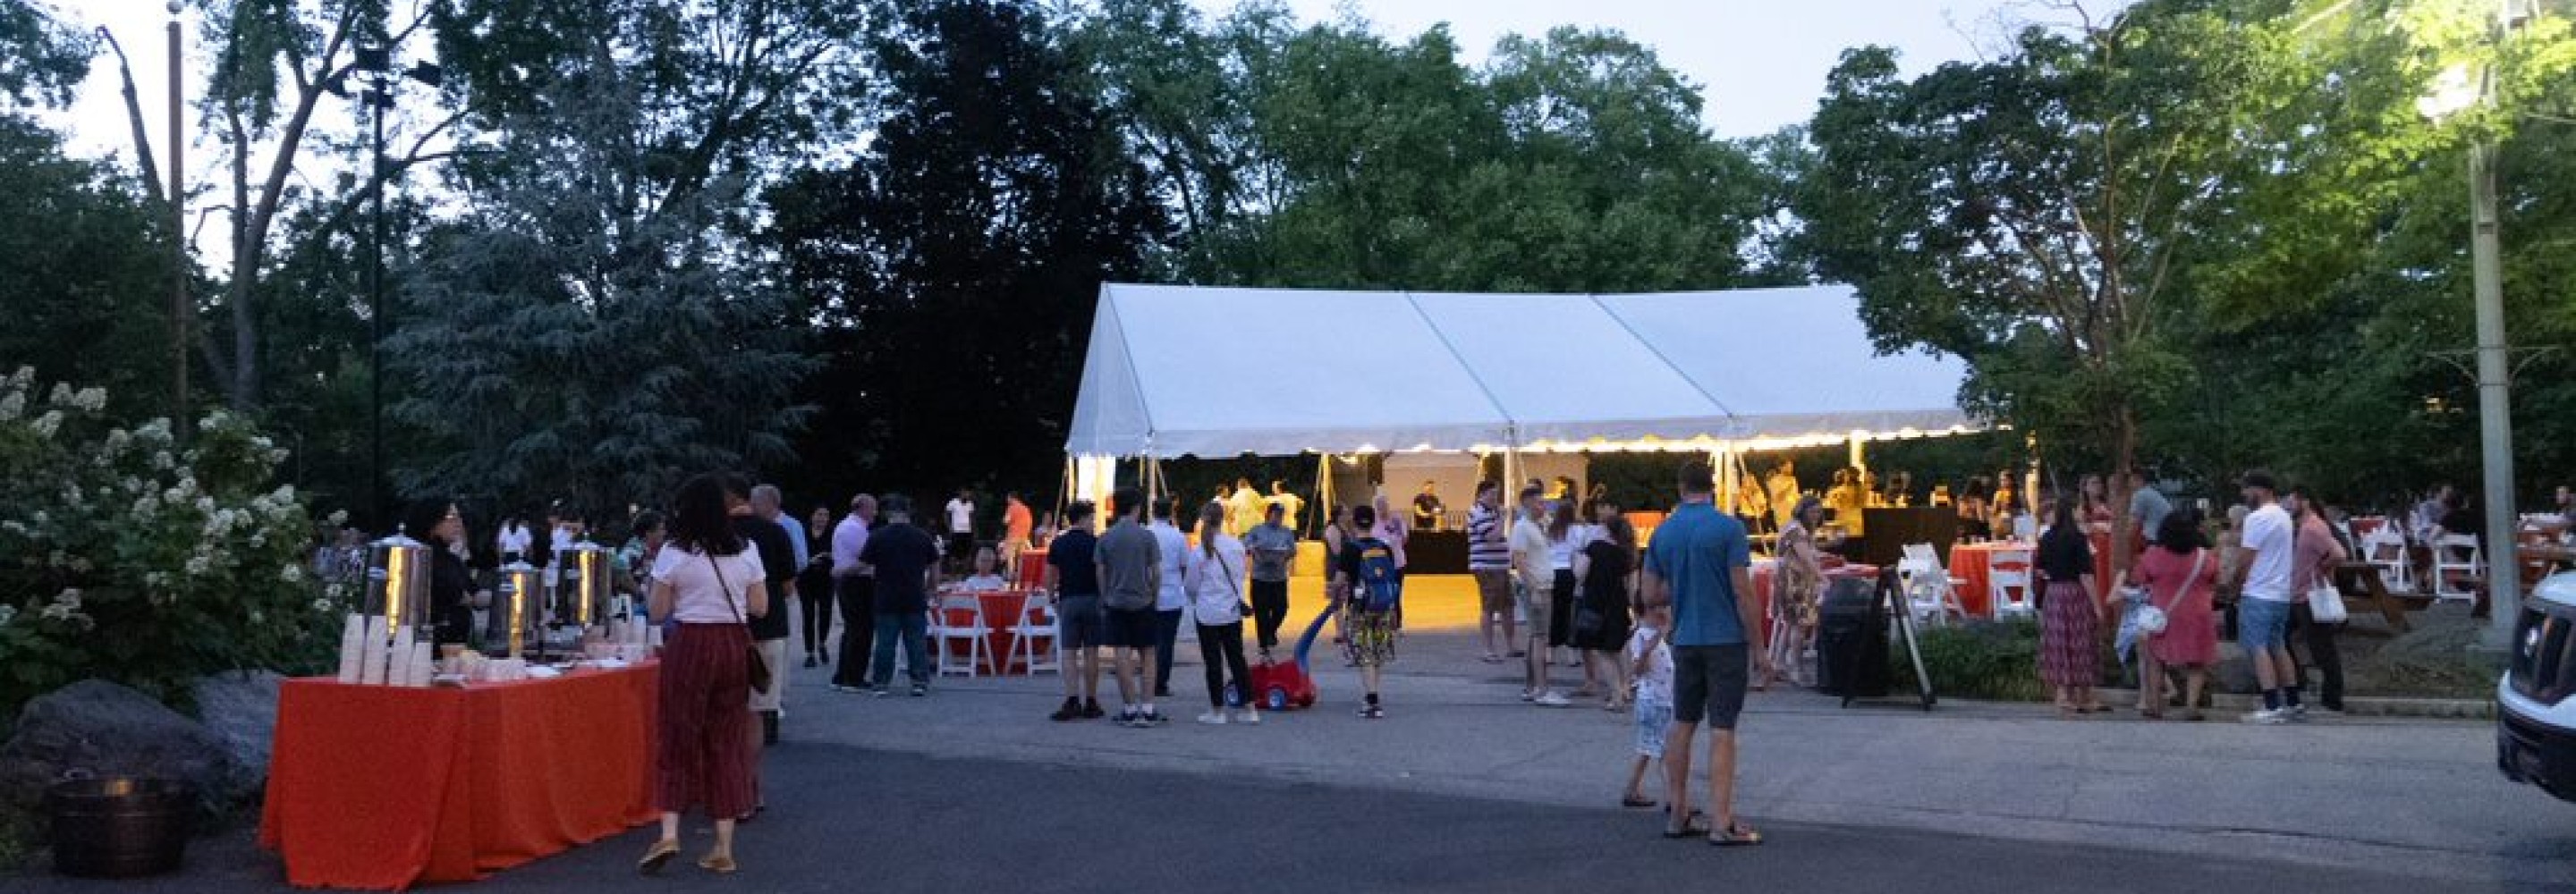 Party goers socialize in and around a large white tent underneath trees at the Zoo